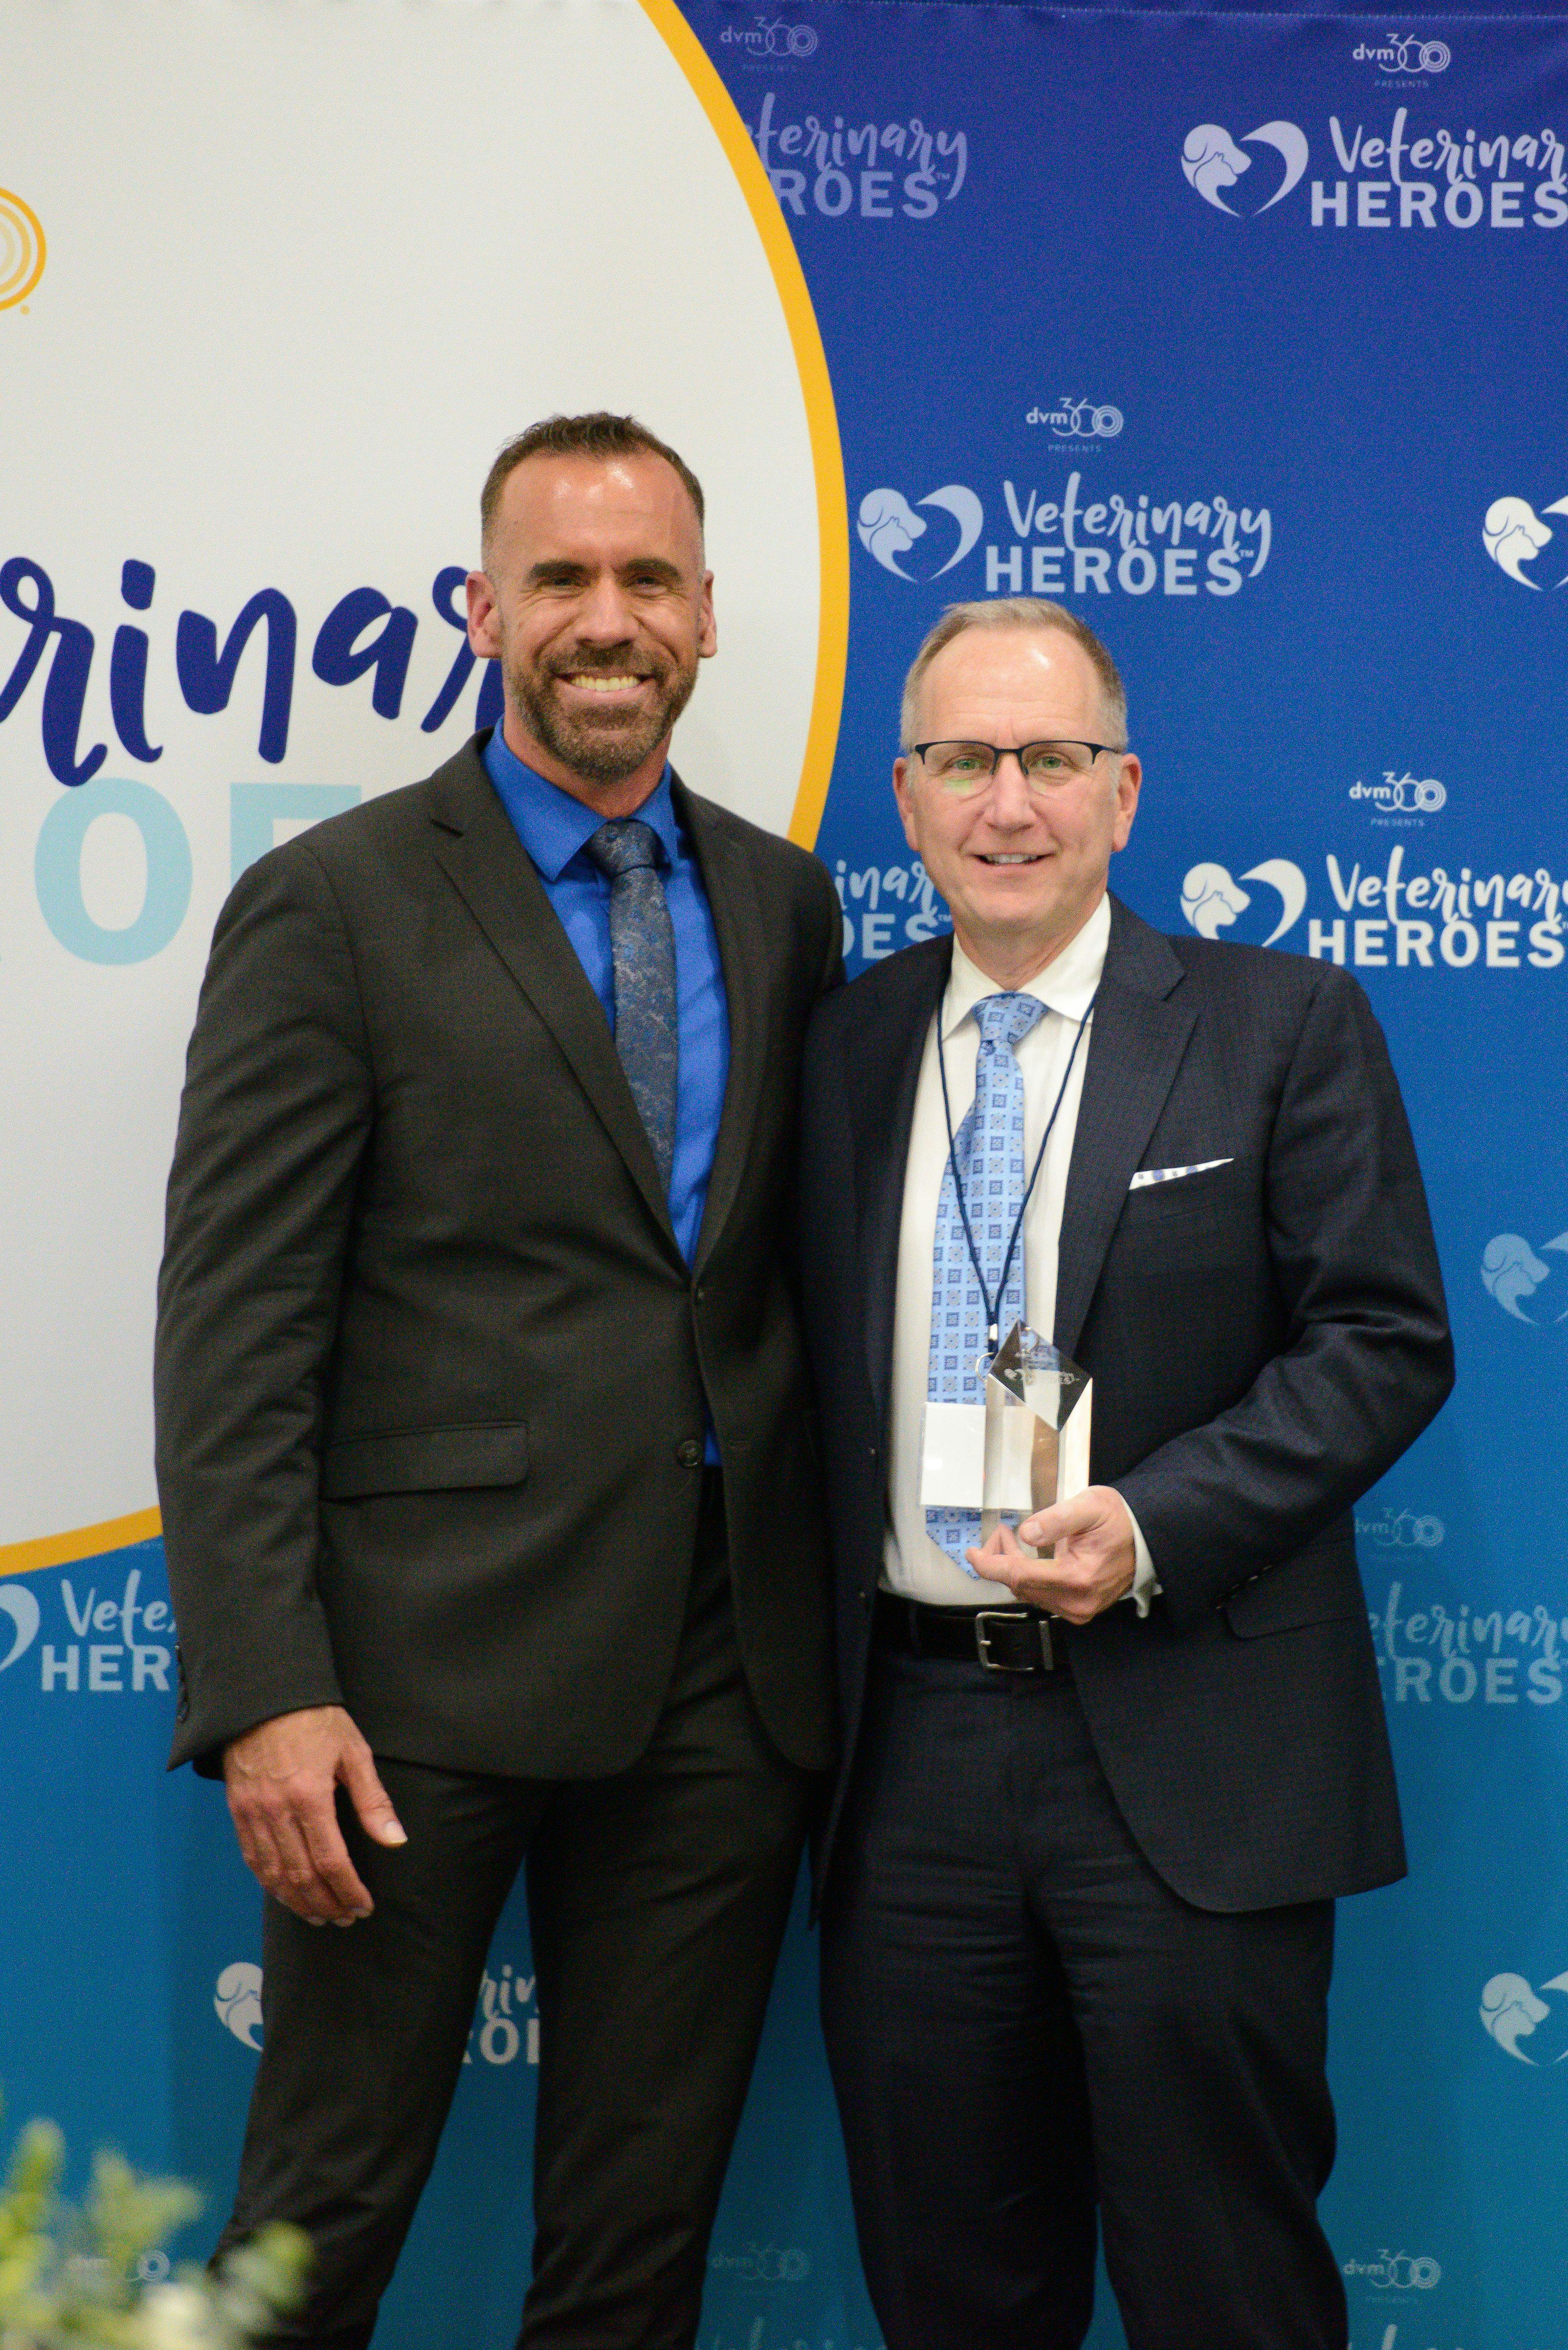 Photo: Jeeheon Cho Photography

Daniel Stobie, DVM, MS, DACVS, (left) receives the Veterinary HeroesTM award for Surgery from Adam Christman, DVM, MBA, chief veterinary officer for dvm360®, during a celebratory gala on December 1, 2021 at Fetch, a dvm360® conference, in San Diego, California.   